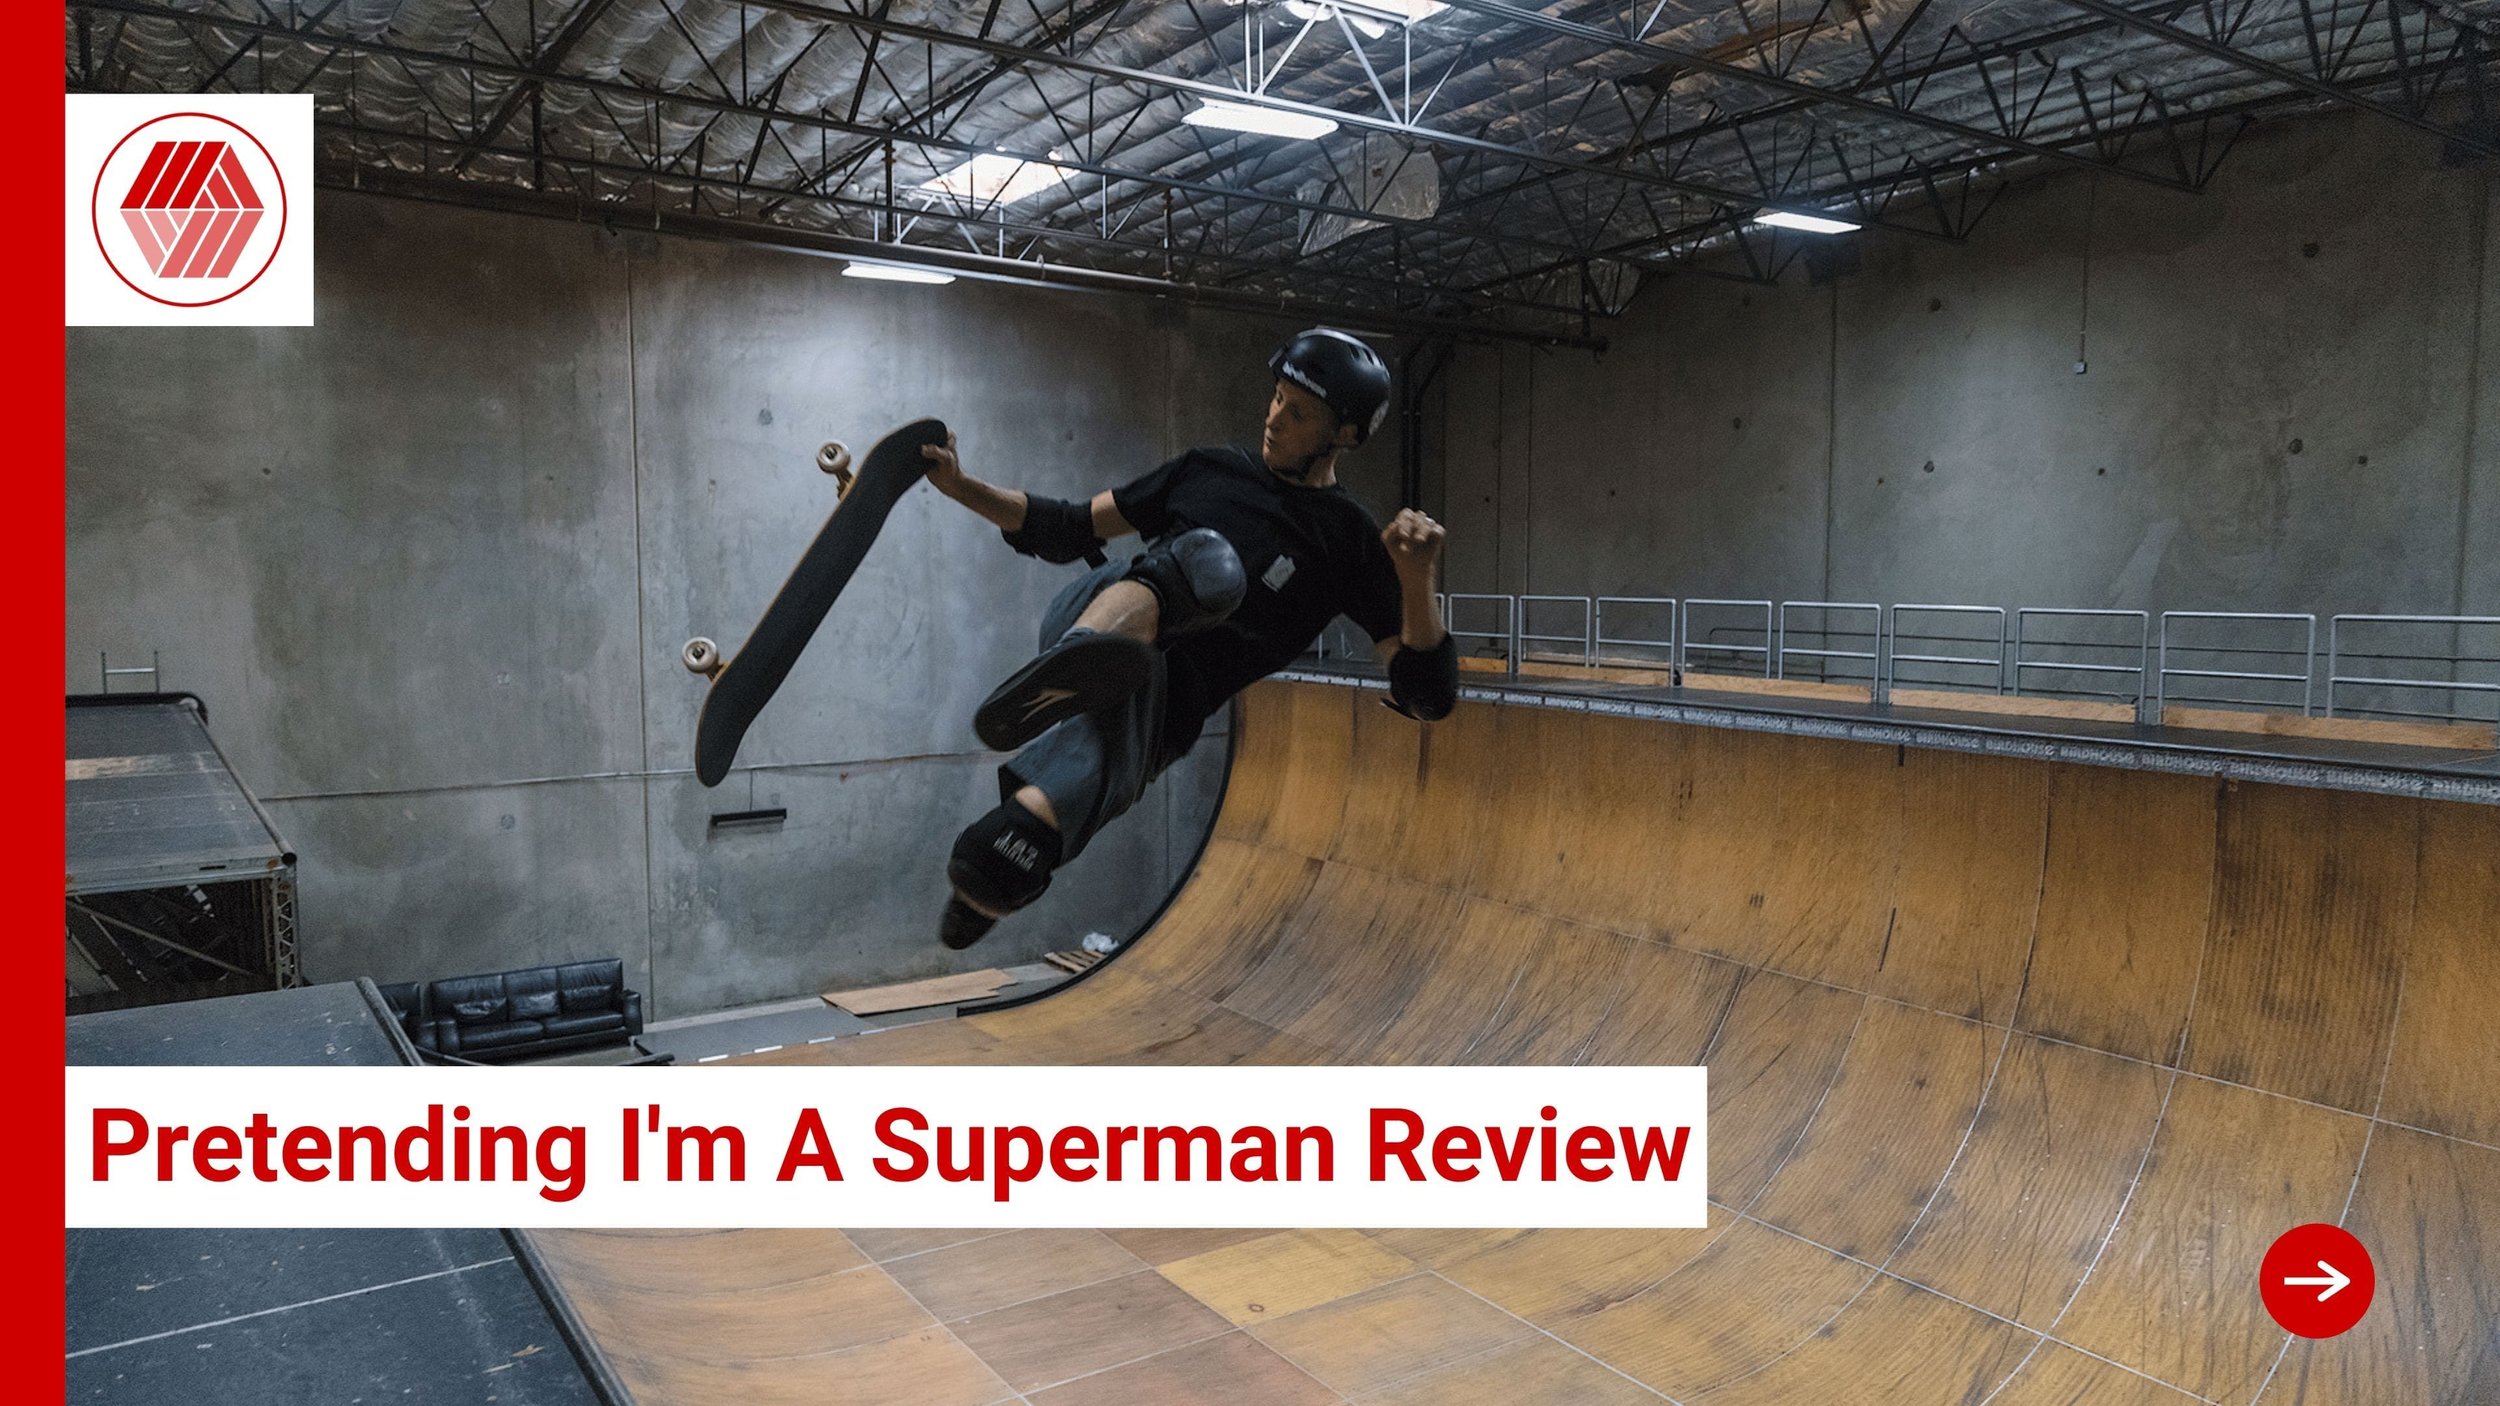 Pretending I'm a Superman: The Tony Hawk Video Game Story Review